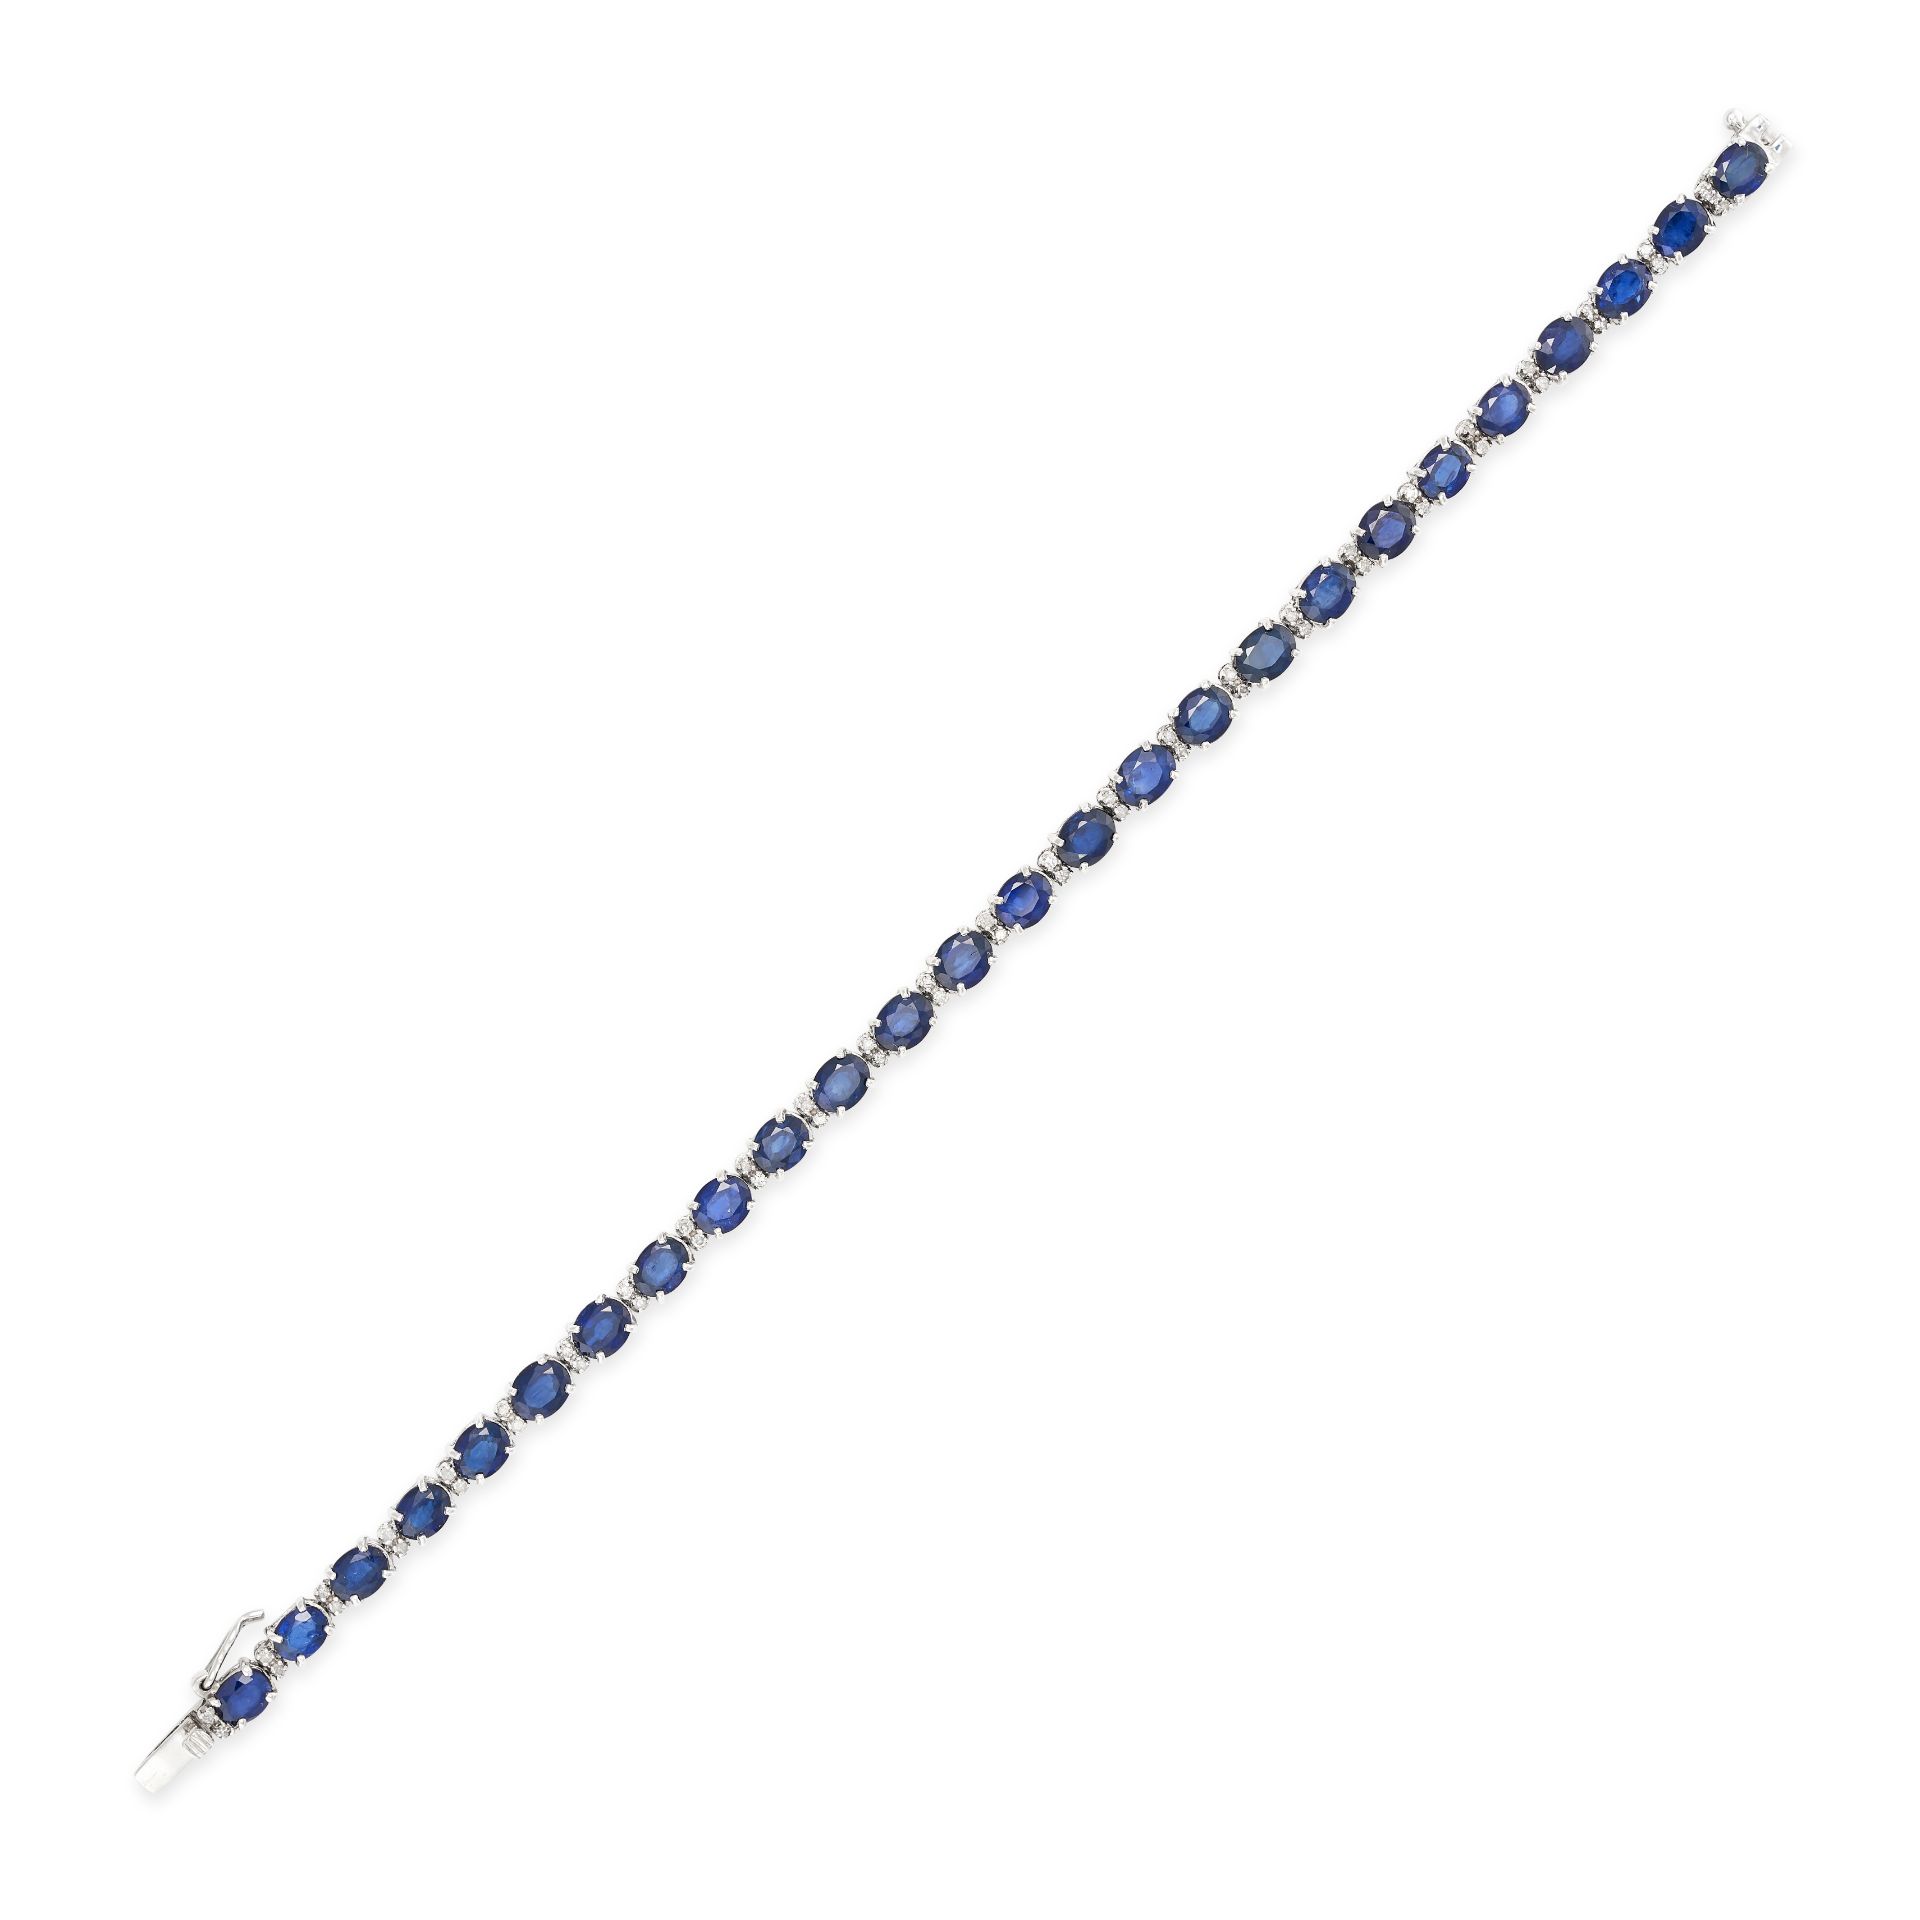 A SAPPHIRE AND DIAMOND LINE BRACELET in 18ct white gold, set with a row of oval cut sapphires acc...